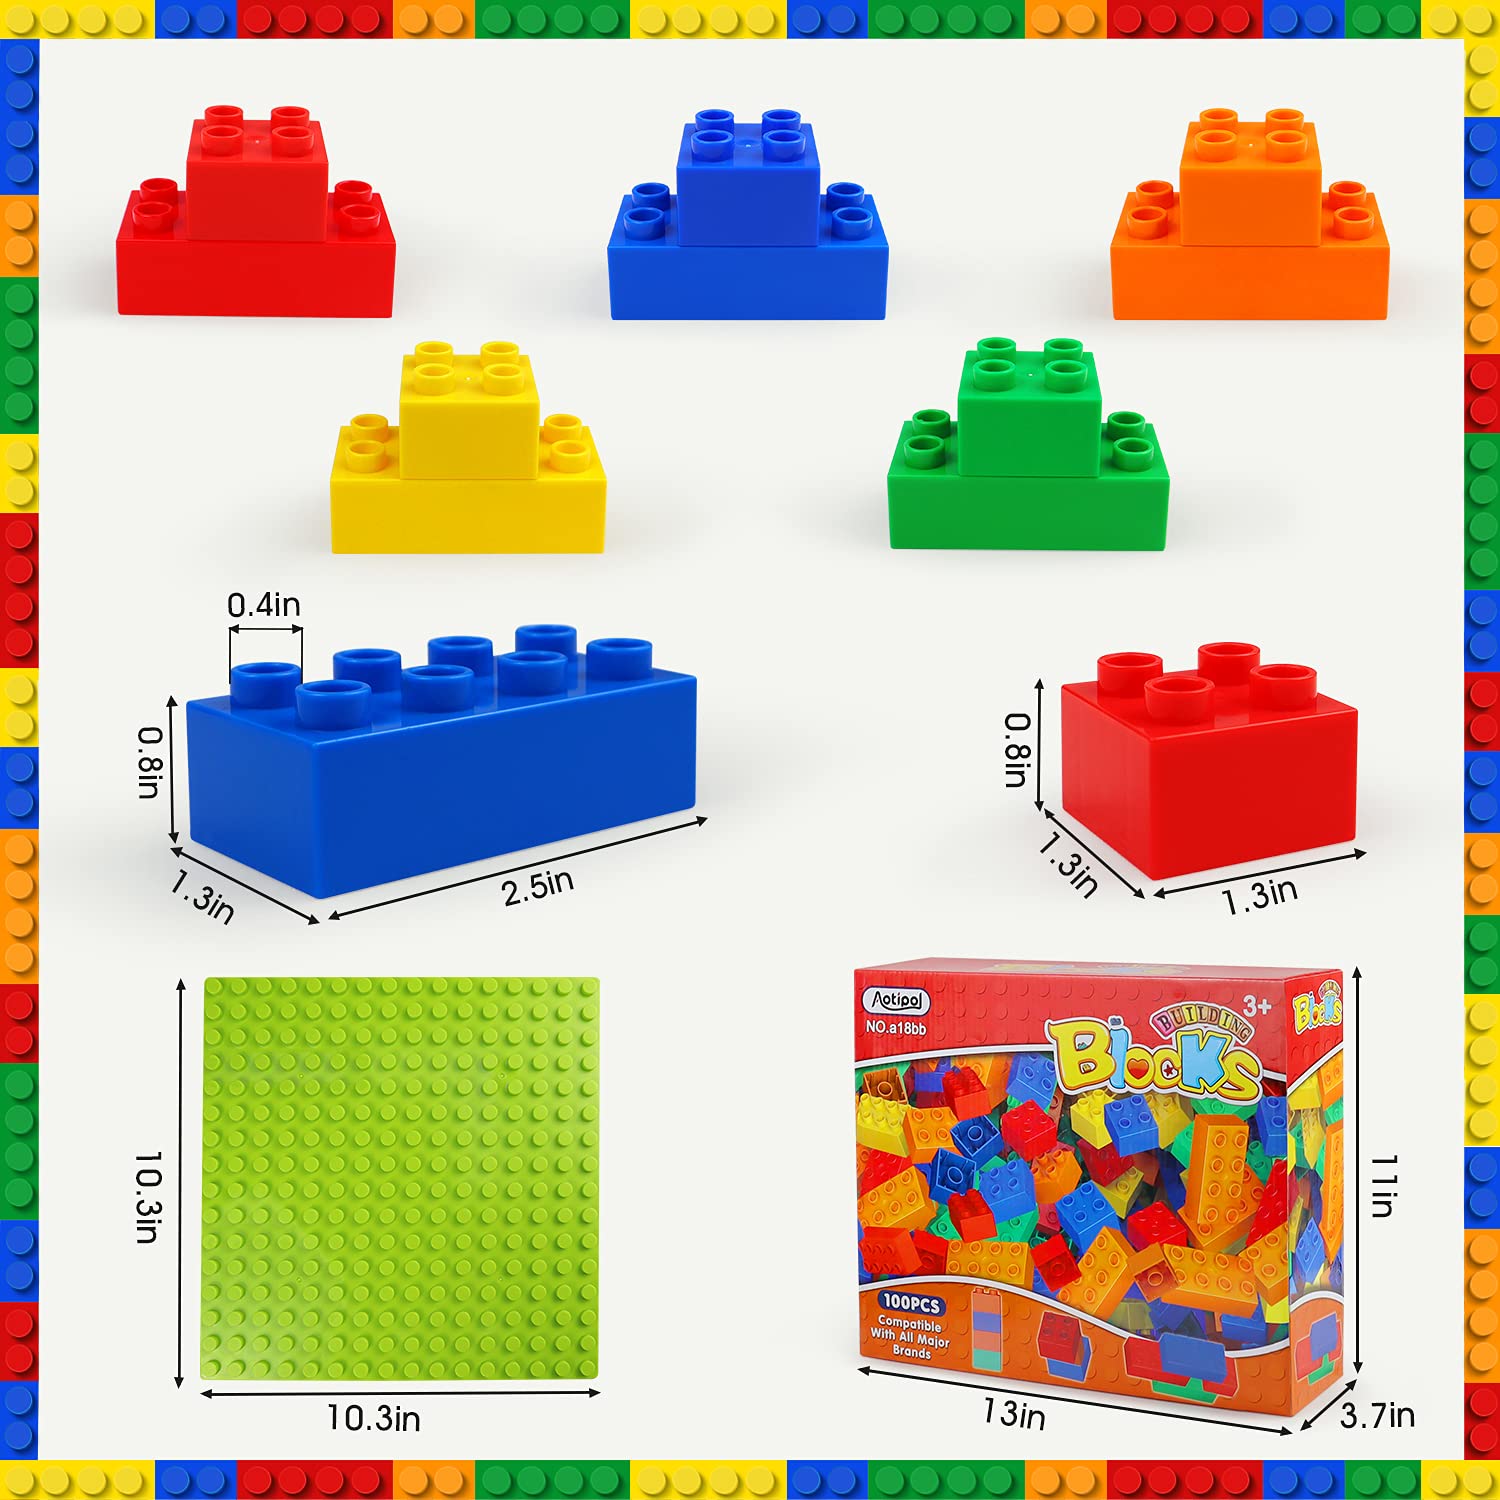 Building Blocks for Kids Toddlers Including a Baseplate, 101-piece Large Classic Building Bricks Set for Kids of All Ages, Basic STEM Toys Gift, Compatible with All Major Brands